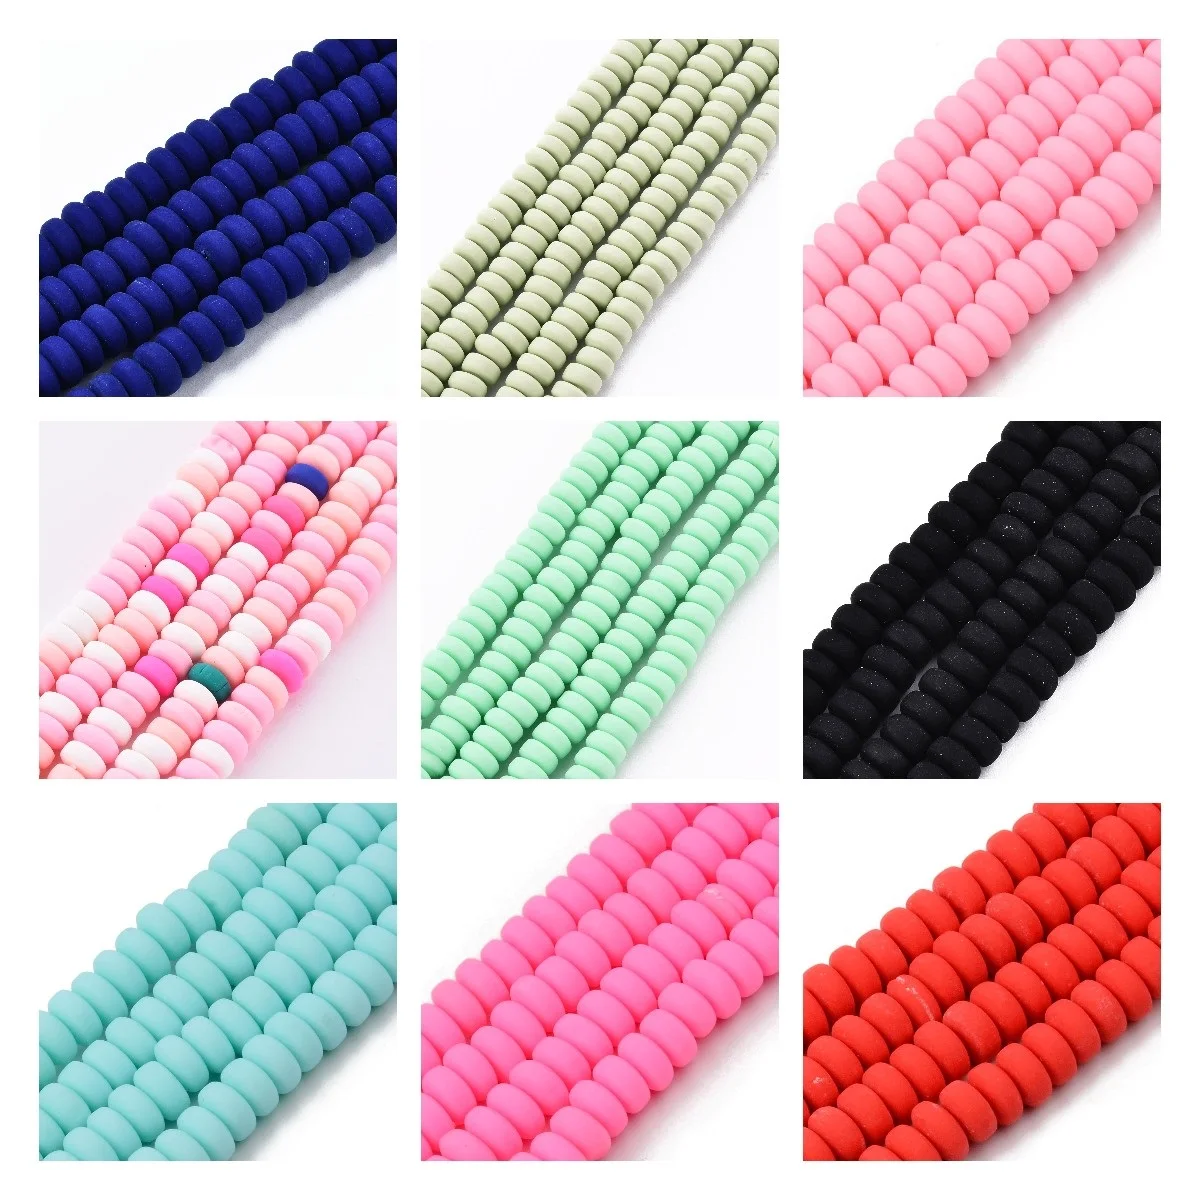 

Wholesale 10Strand 6mm Flat Round Polymer Clay Beads Chip Disk Loose Spacer Heishi Bead for Handmade DIY Jewelry Making Bracelet